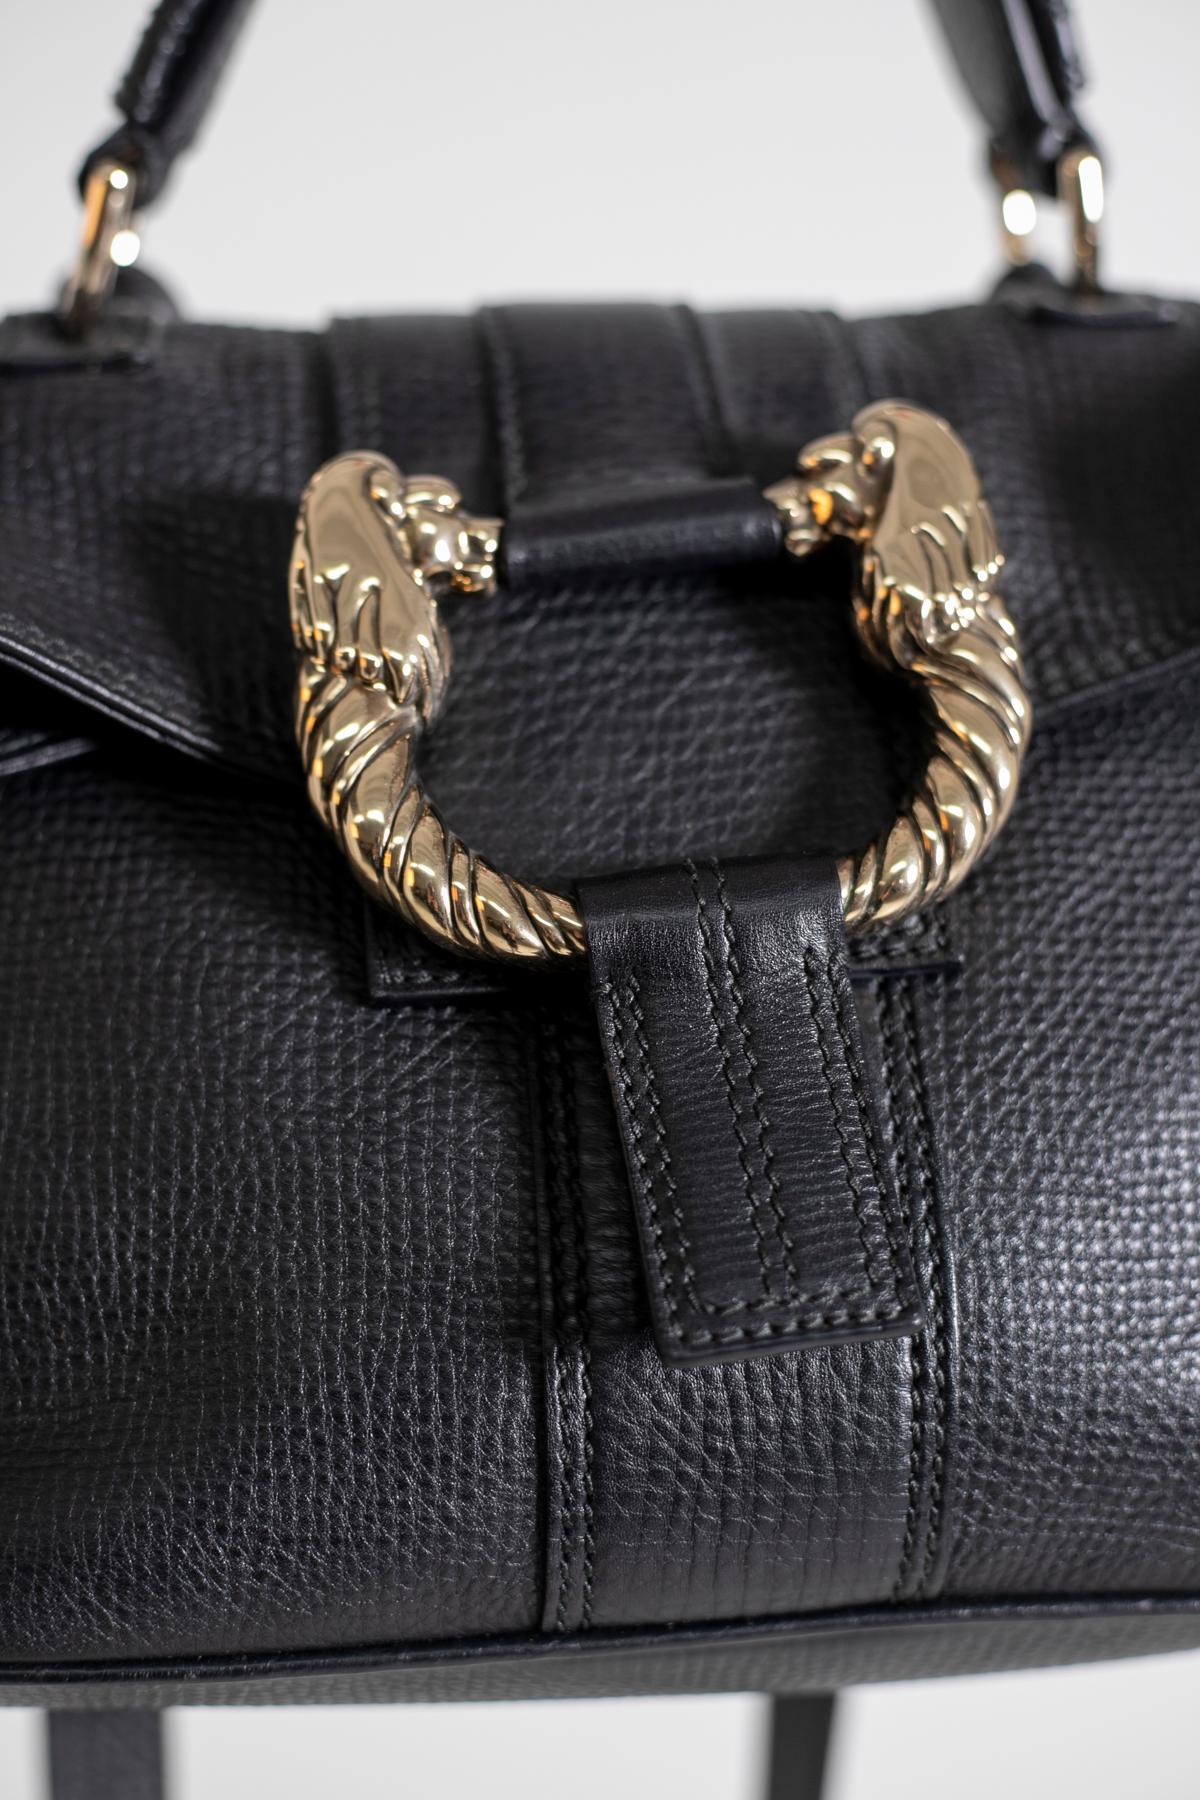 Beautiful Bulgari bag, its characteristic is the soft leather and its practicality, that is, it can be carried either over the shoulder or by hand. On the front it is embellished with a lion-shaped metal jewel. The interior is spacious and has a